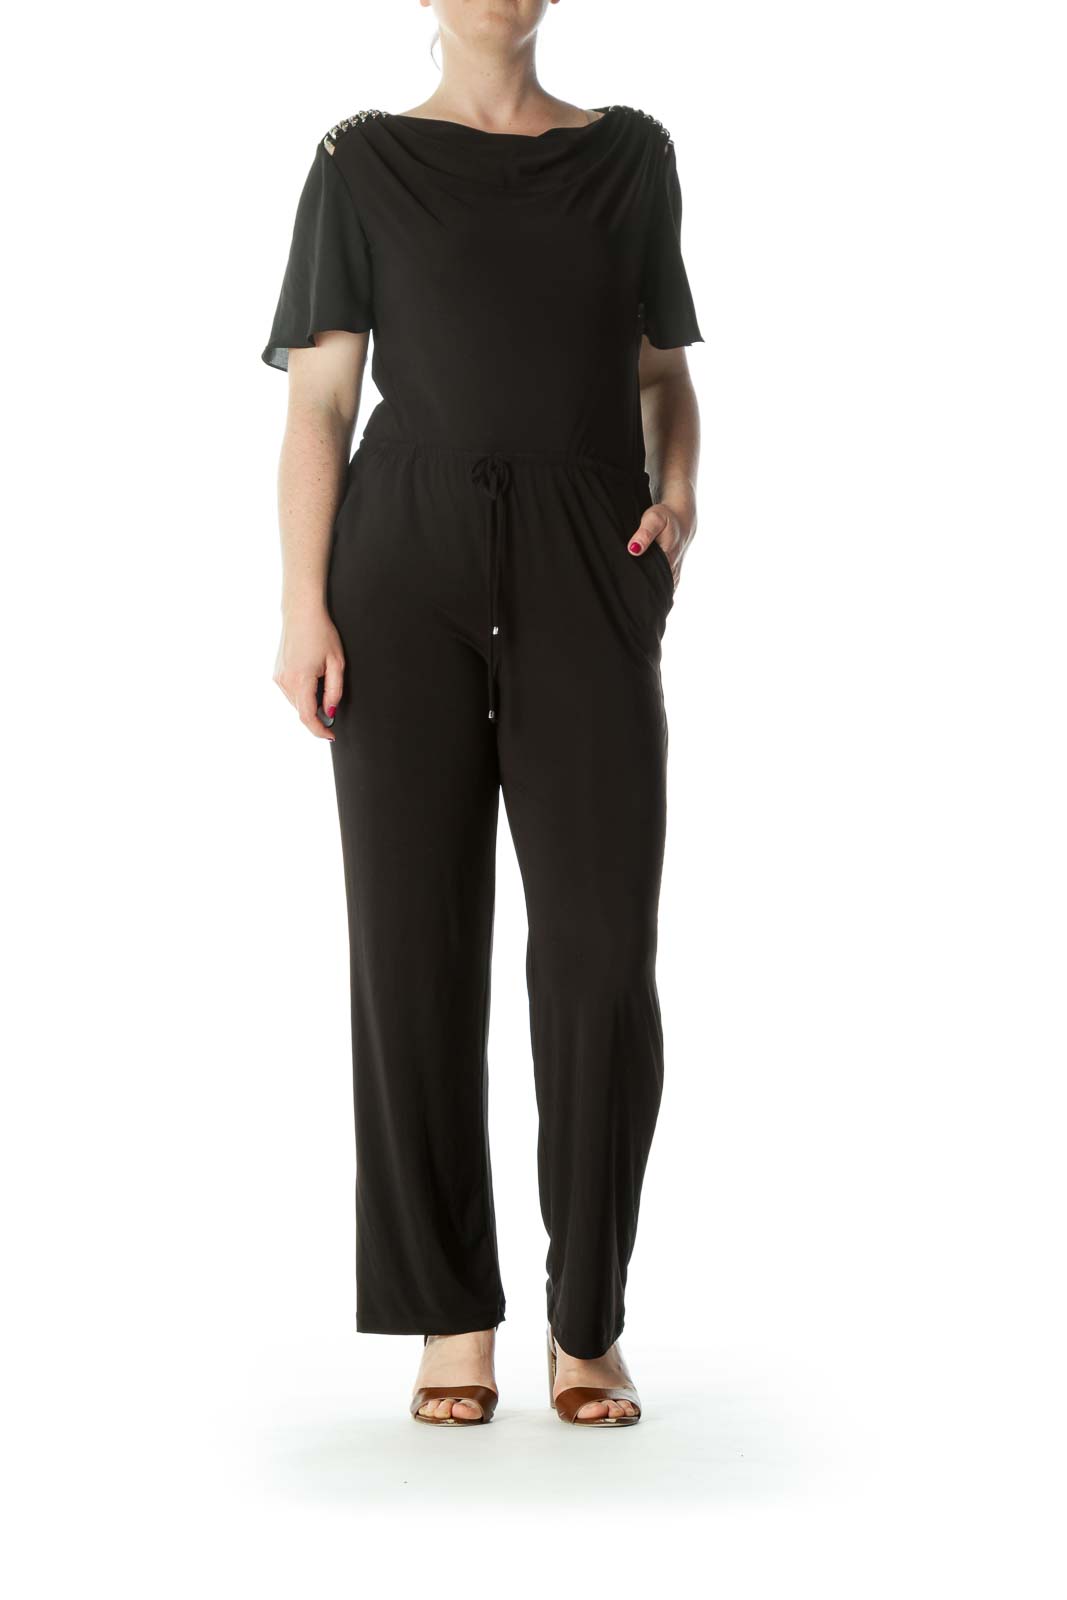 Kate & Mallory - Black Jumpsuit with Metal Detail Polyester2 Spandex ...